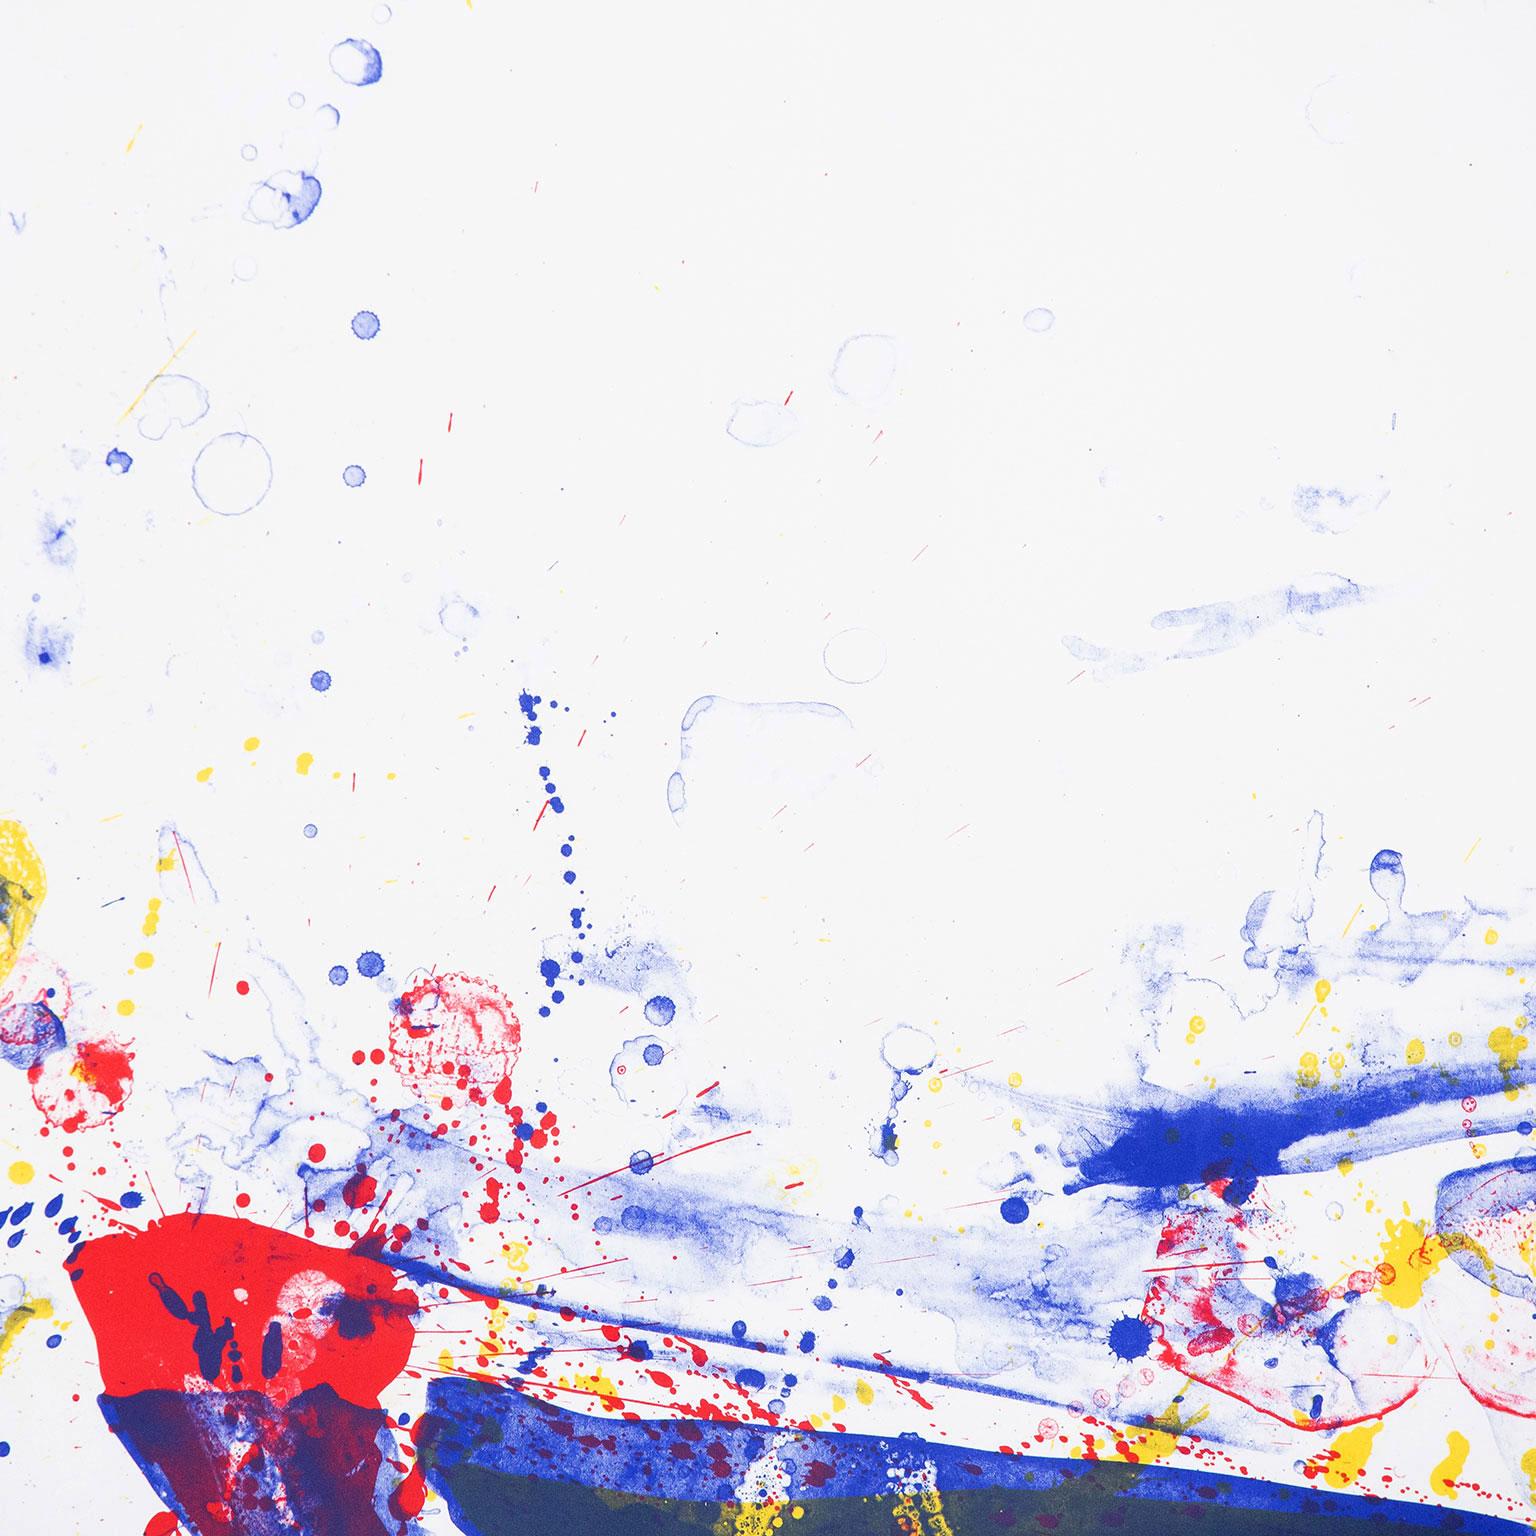 Sam Francis (1923-1994) is one of the most distinctive and collected 20th-century abstract artists. 

After serving in the air force in WWII, Francis returned to his native California gradually immersing himself in art making. By the end of the